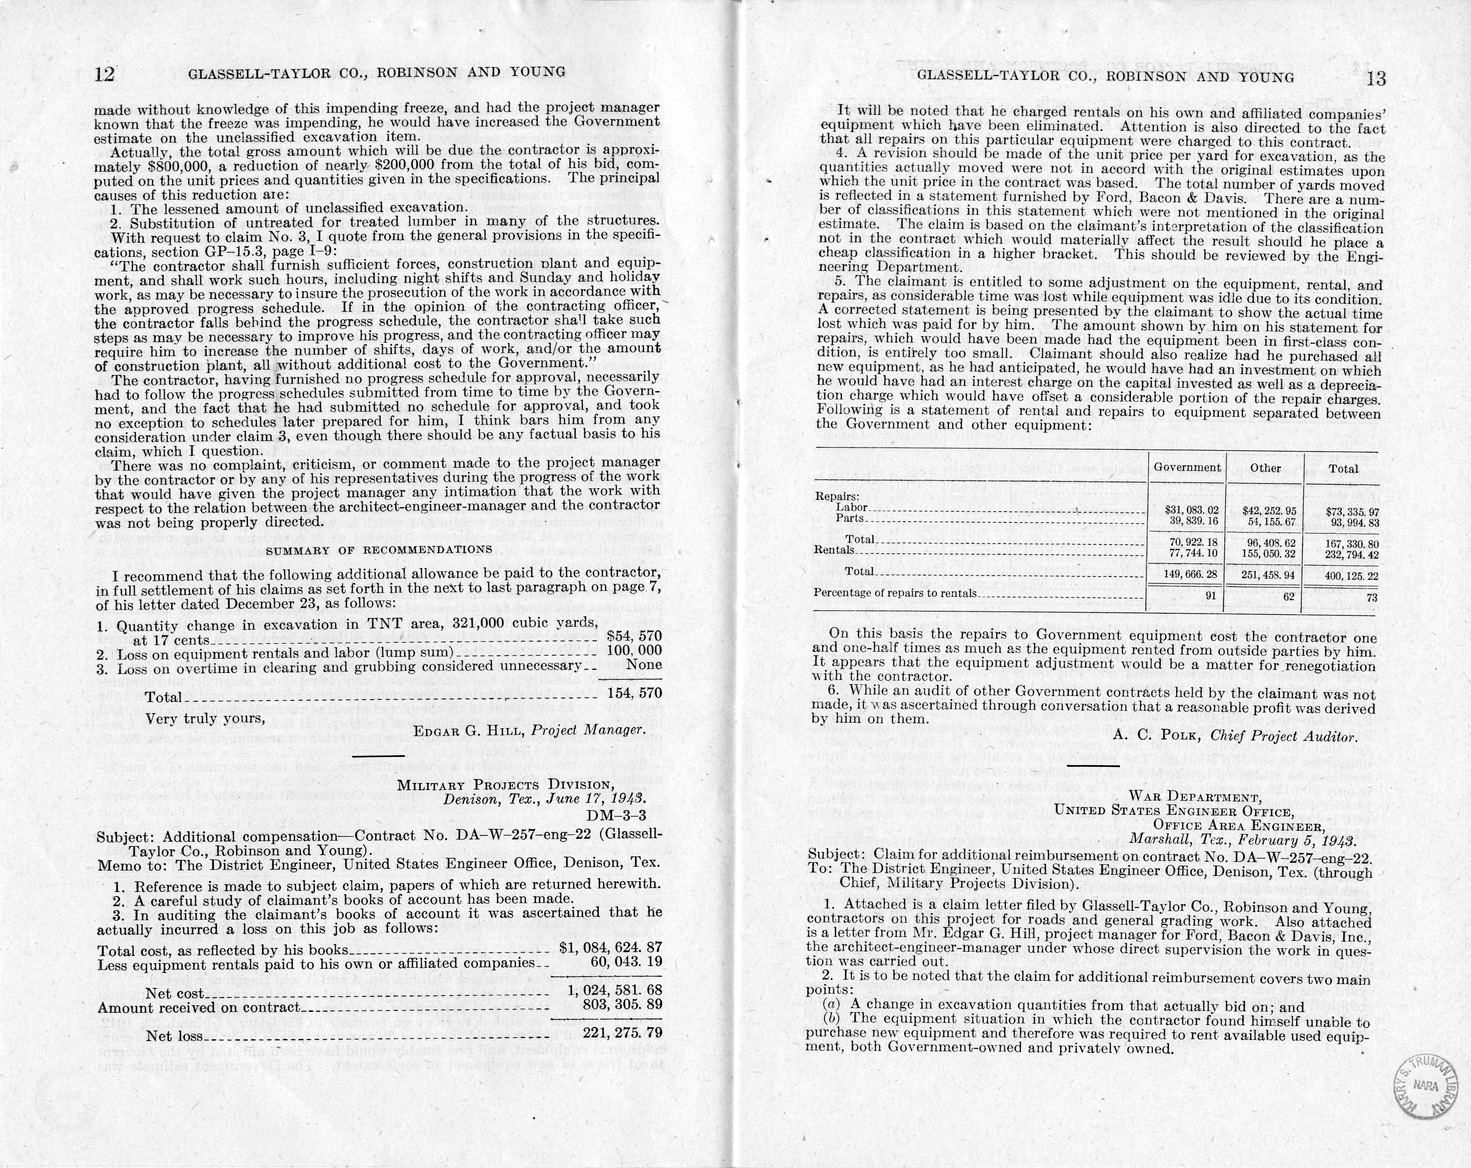 Memorandum from Paul Appleby to M. C. Latta, H.R. 1975, For the Relief of the Glassell-Taylor Company, Robinson and Young, with Attachments